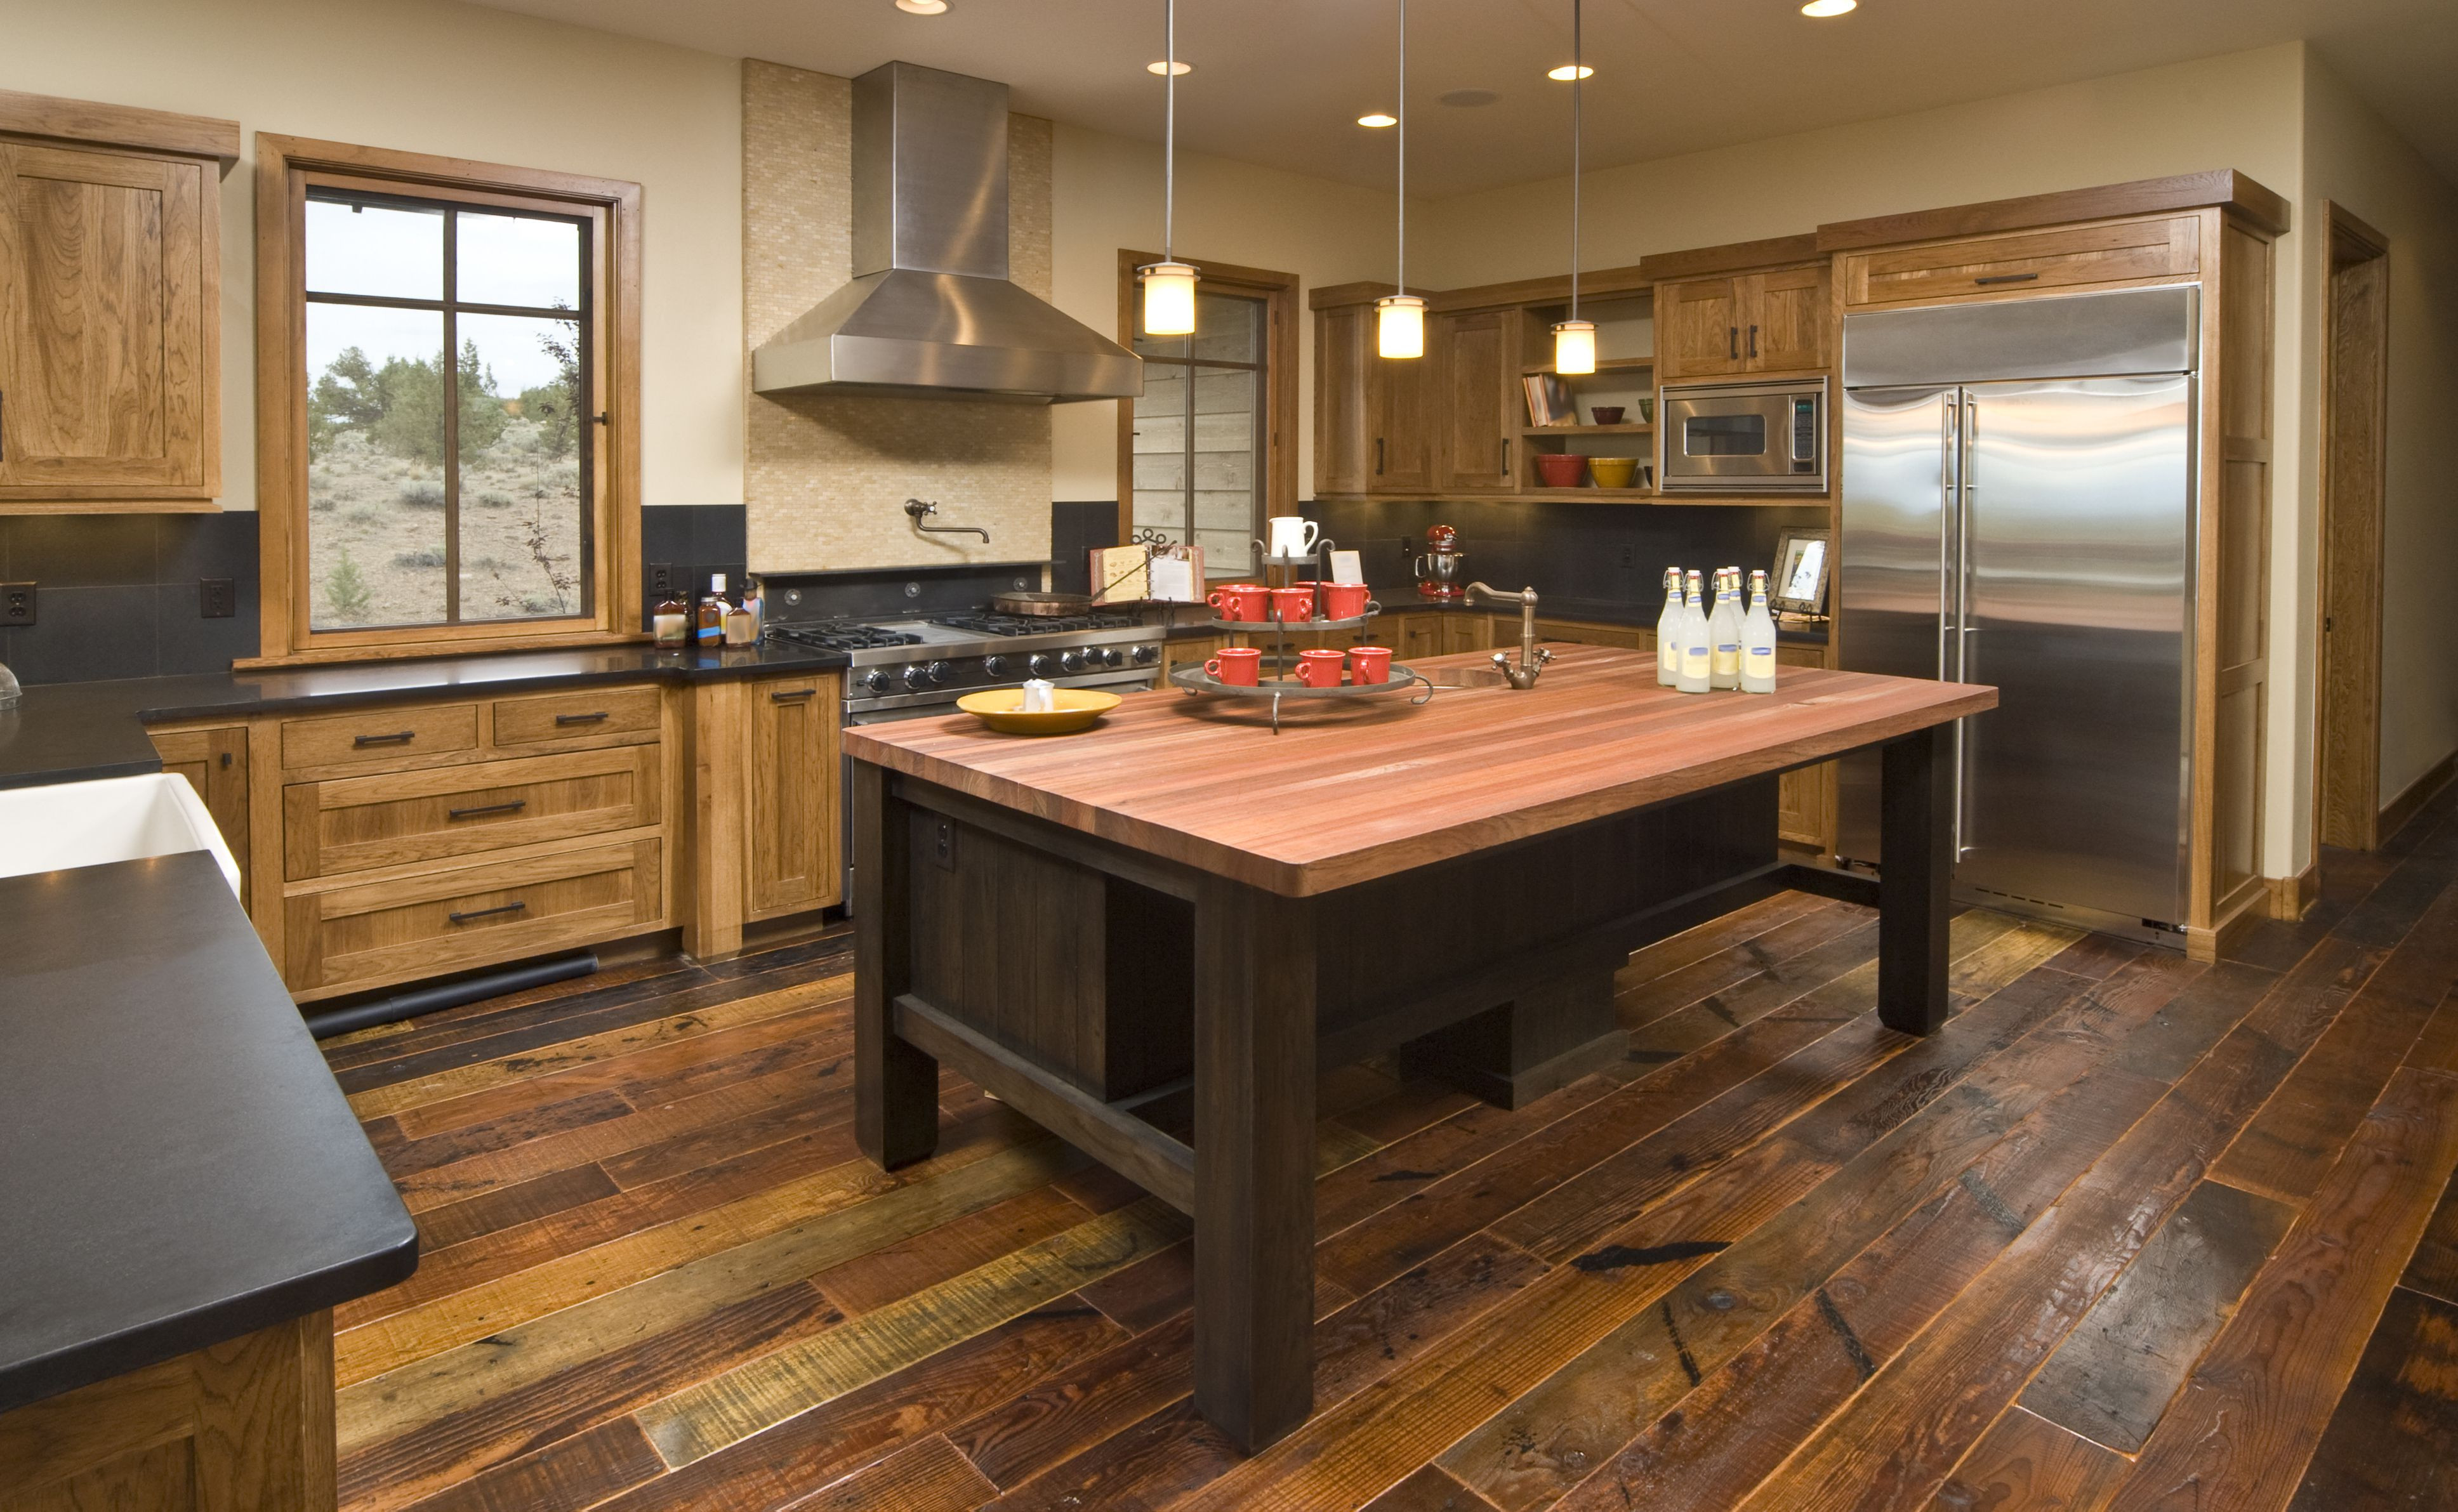 23 Famous Rustic Hardwood Flooring for Sale 2022 free download rustic hardwood flooring for sale of where to buy reclaimed wood flooring inside rustic modern kitchen 157565456 58ae76a73df78c345ba2f5d1